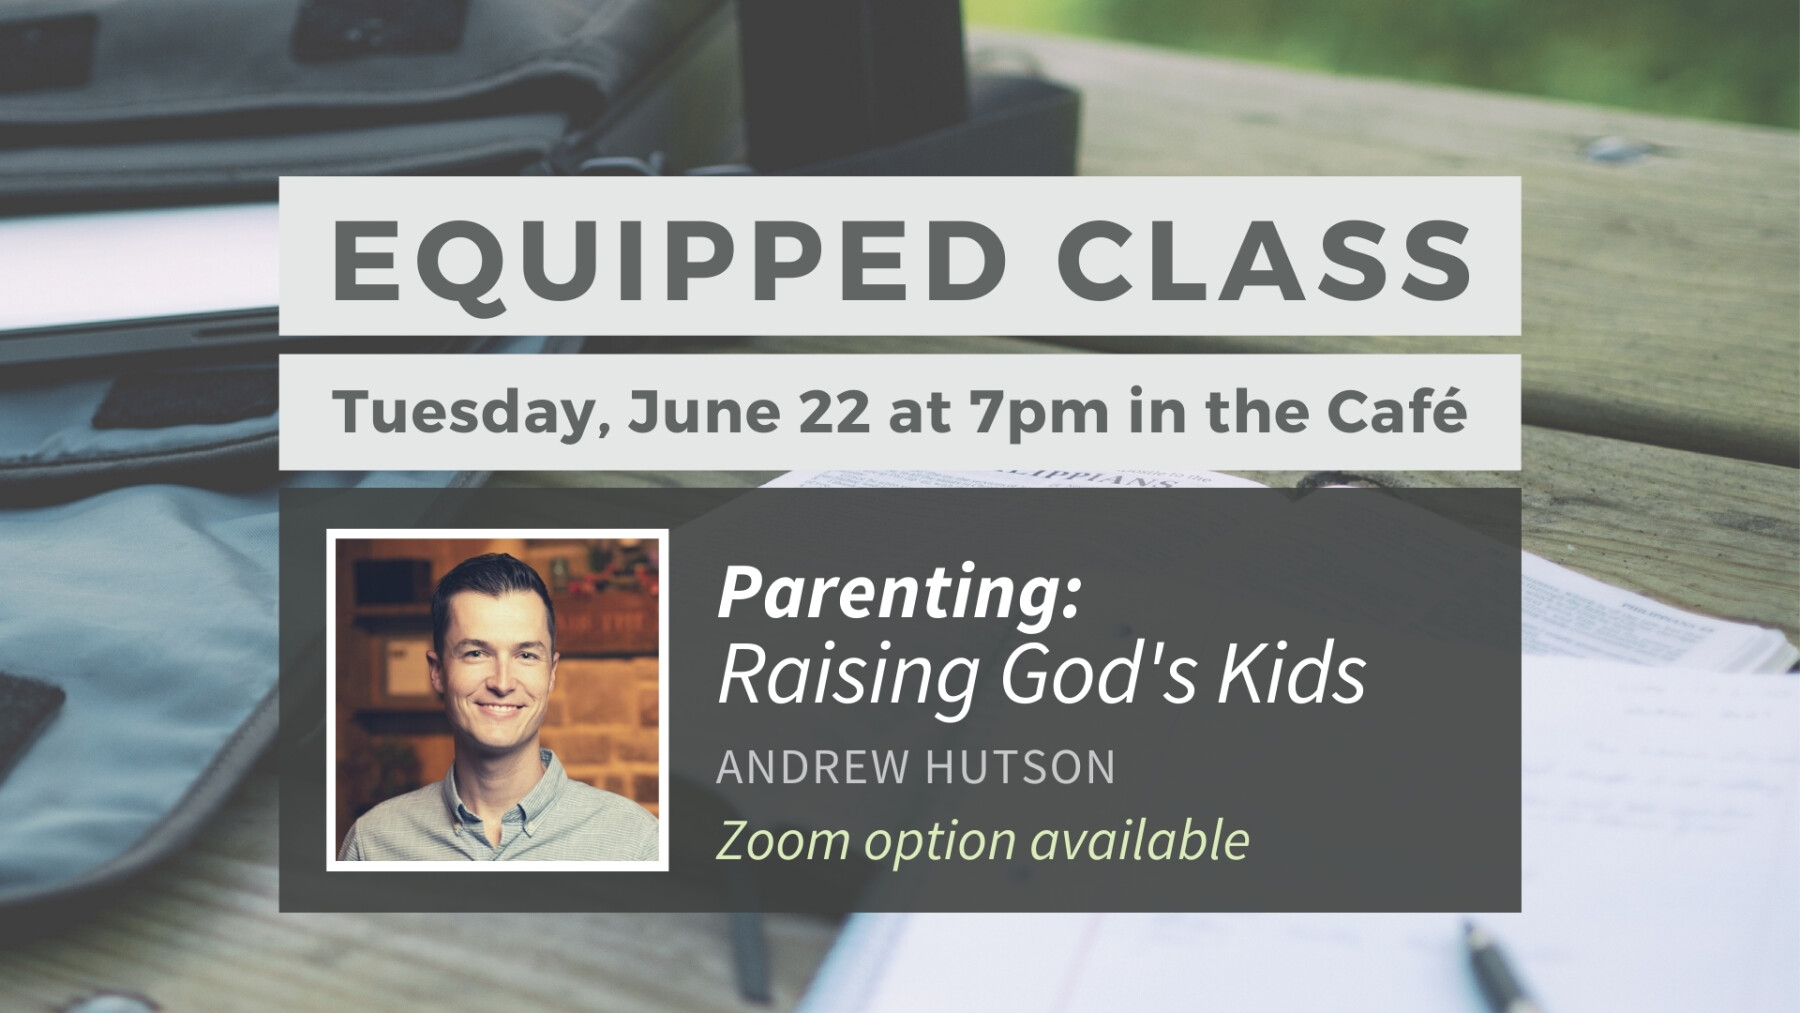 Equipped Class: Parenting - Raising God's Kids